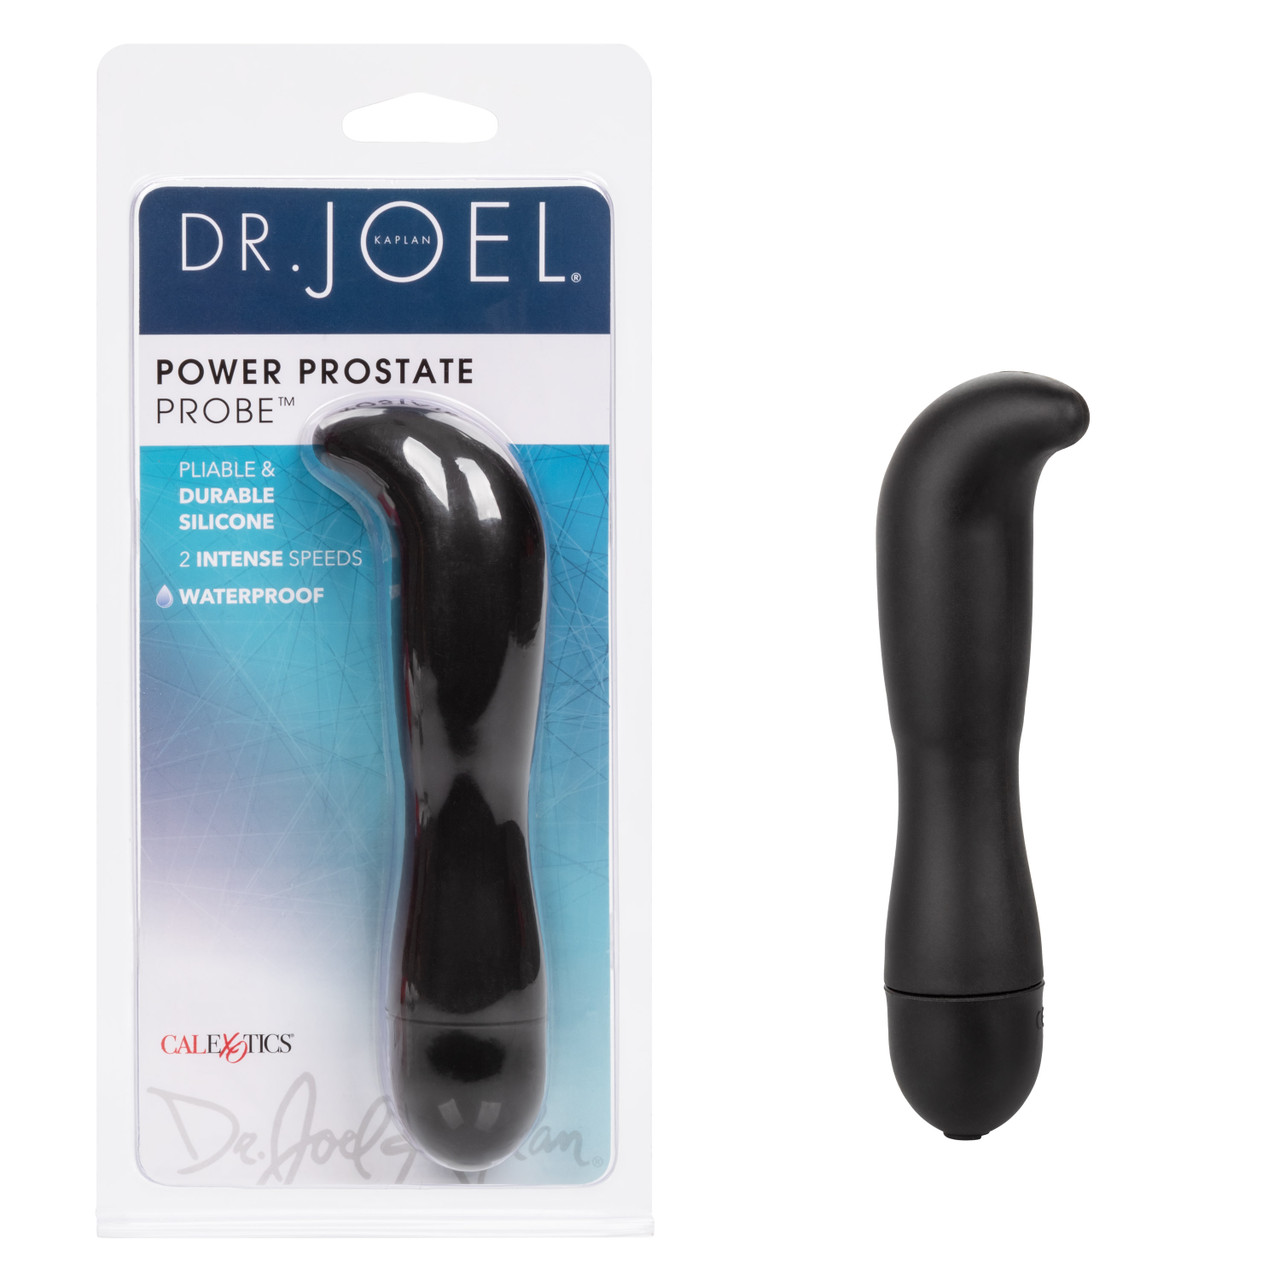 DR JOEL POWER PROBE PROSTATE - Click Image to Close